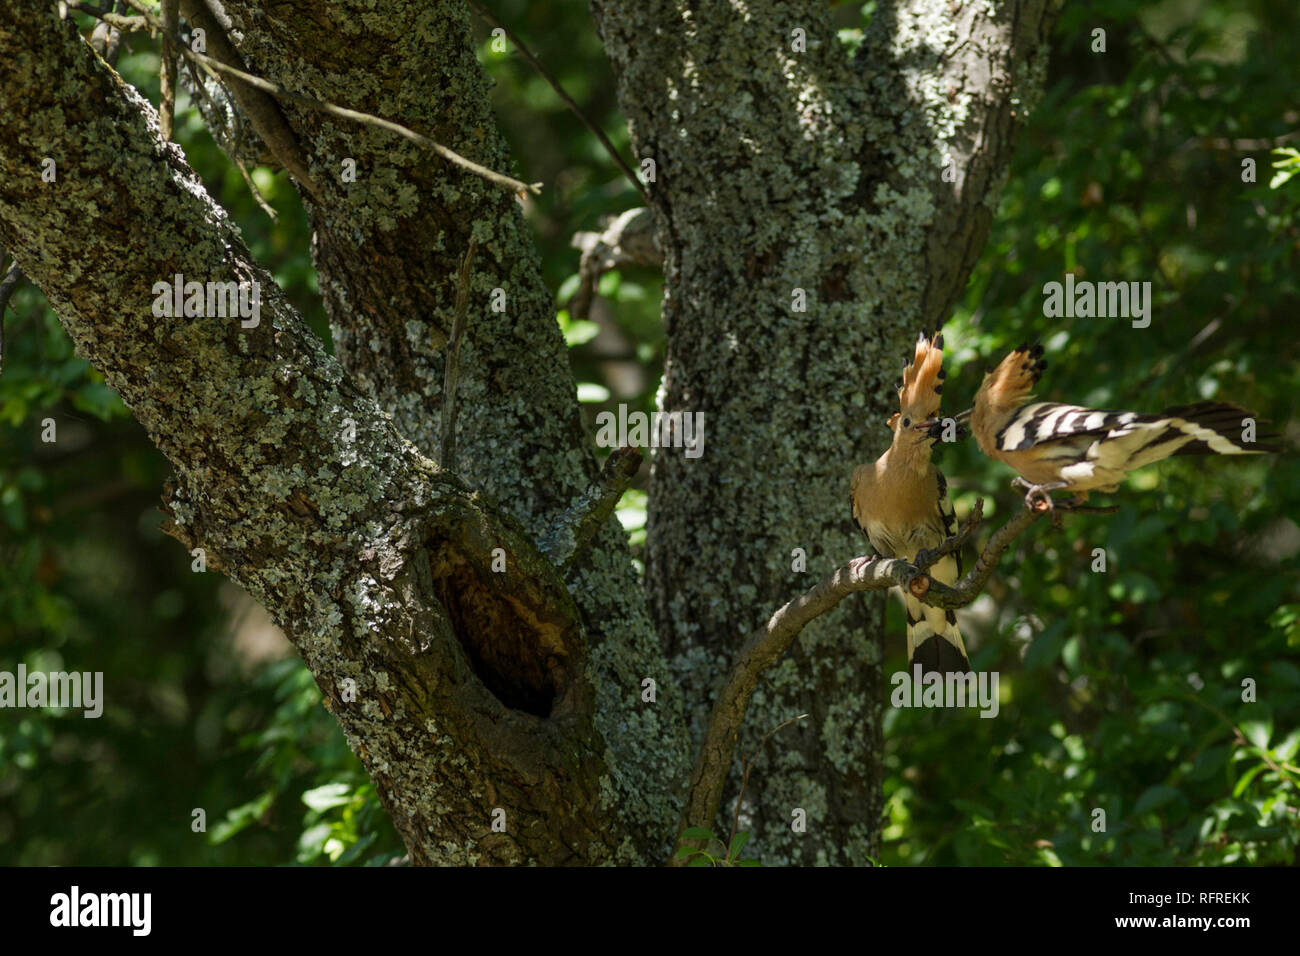 Hoopoe, Latin name Upupa epops, pair courtship feeding on a branch next totheir nest with crest raised in woodland habitat in dappled sunlight Stock Photo